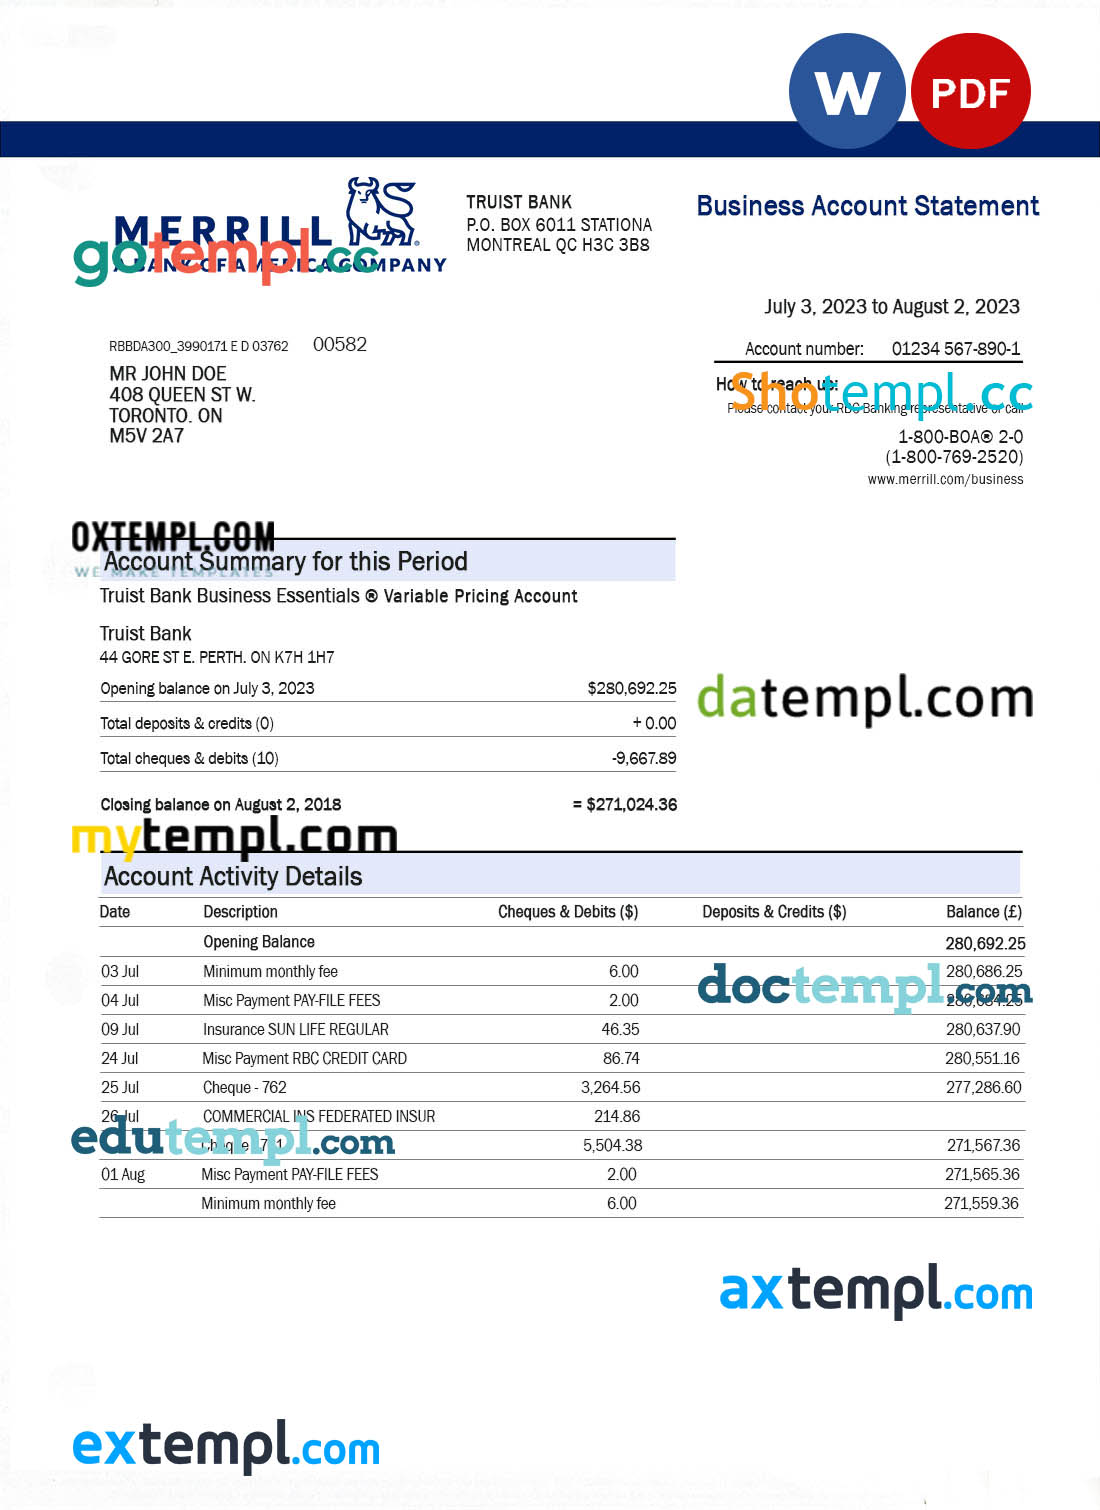 editable template, MERRILL Bank organization account statement Word and PDF template